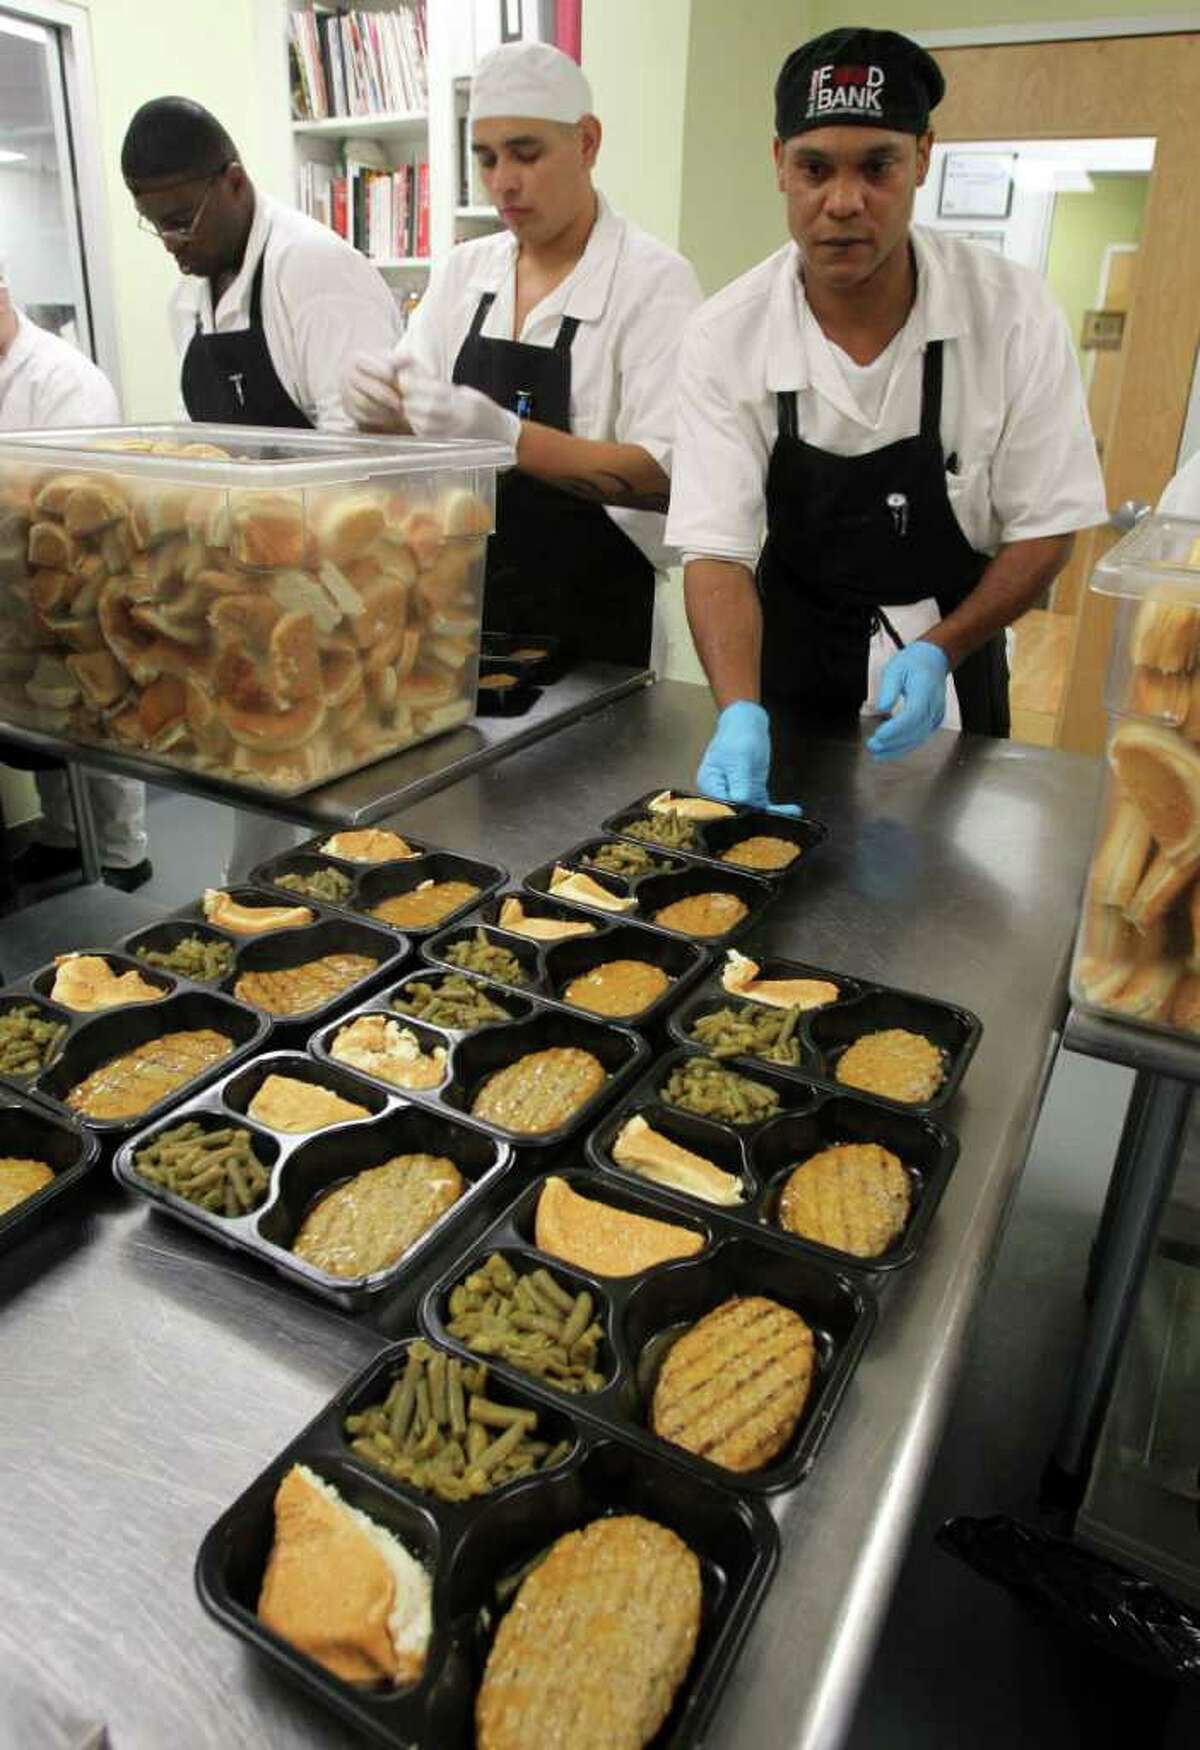 Prison inmate James Thomas (right) moves trays of food at the San Antonio Food Bank that will be fed to kids in after school programs. Inmates learn culinary skills in the Community Kitchen program and prepare 800 to 900 meals a day. The inmates are from the Torres Unit near Hondo, Texas. JOHN DAVENPORT/jdavenport@express-news.net